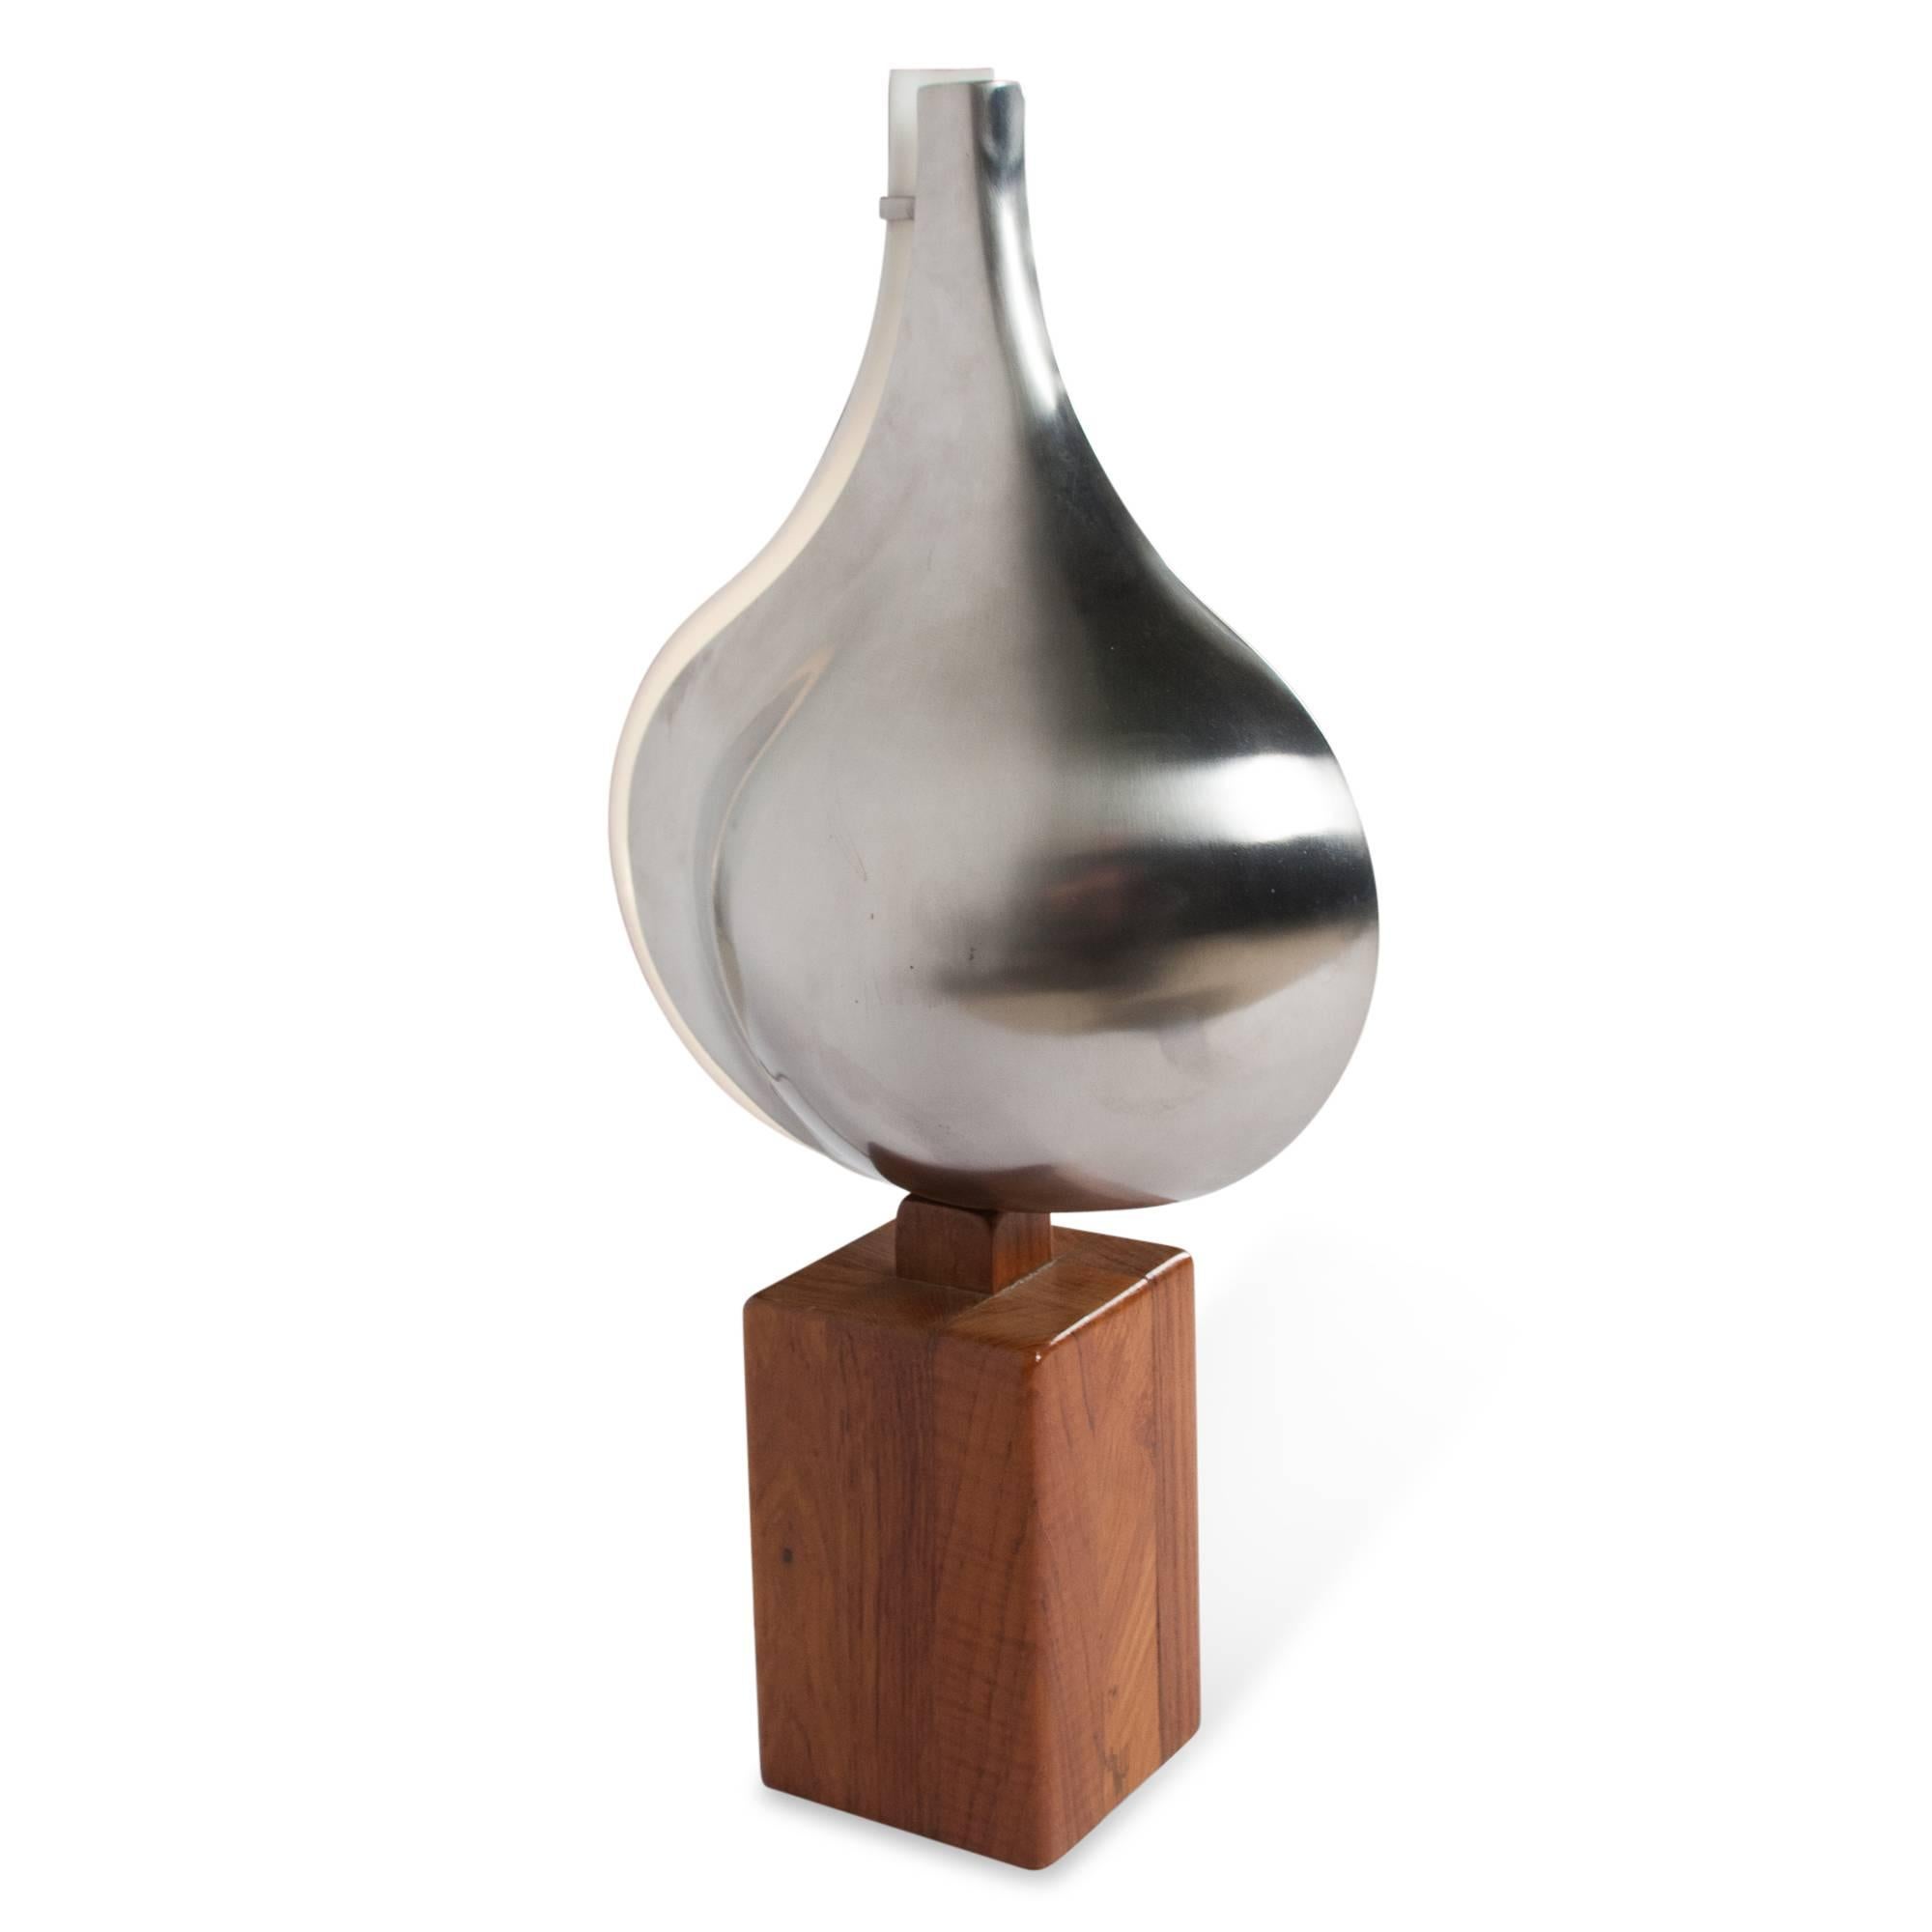 Teardrop Shaped Steel and Plastic Table Lamp, French, 1960s For Sale 1